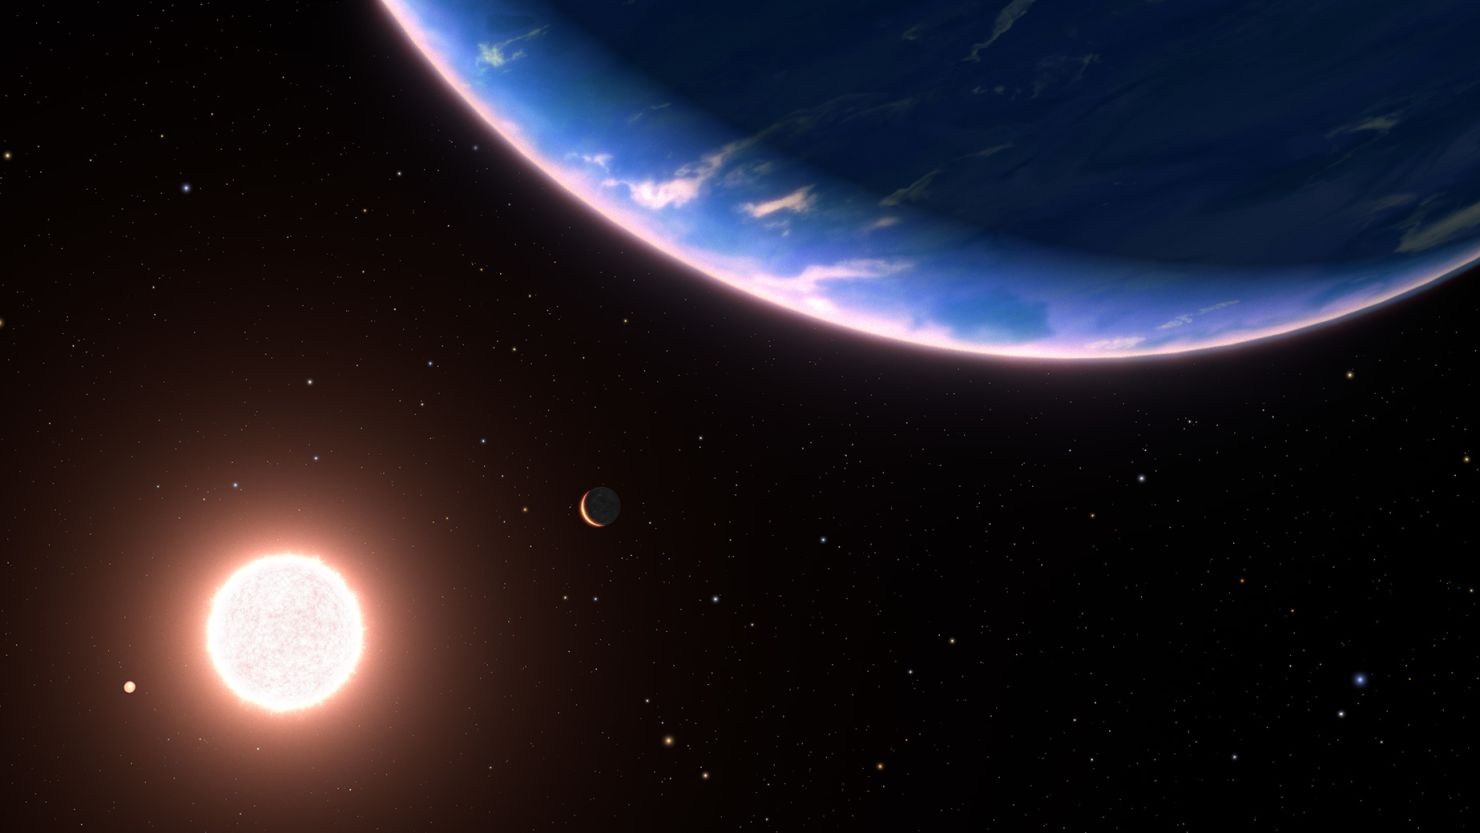 An artist's illustration depicts exoplanet GJ 9827d (foreground, right) — the smallest exoplanet where atmospheric water vapor has been detected — as it orbits a host star. Two inner planets (bottom left) in the system are also shown.